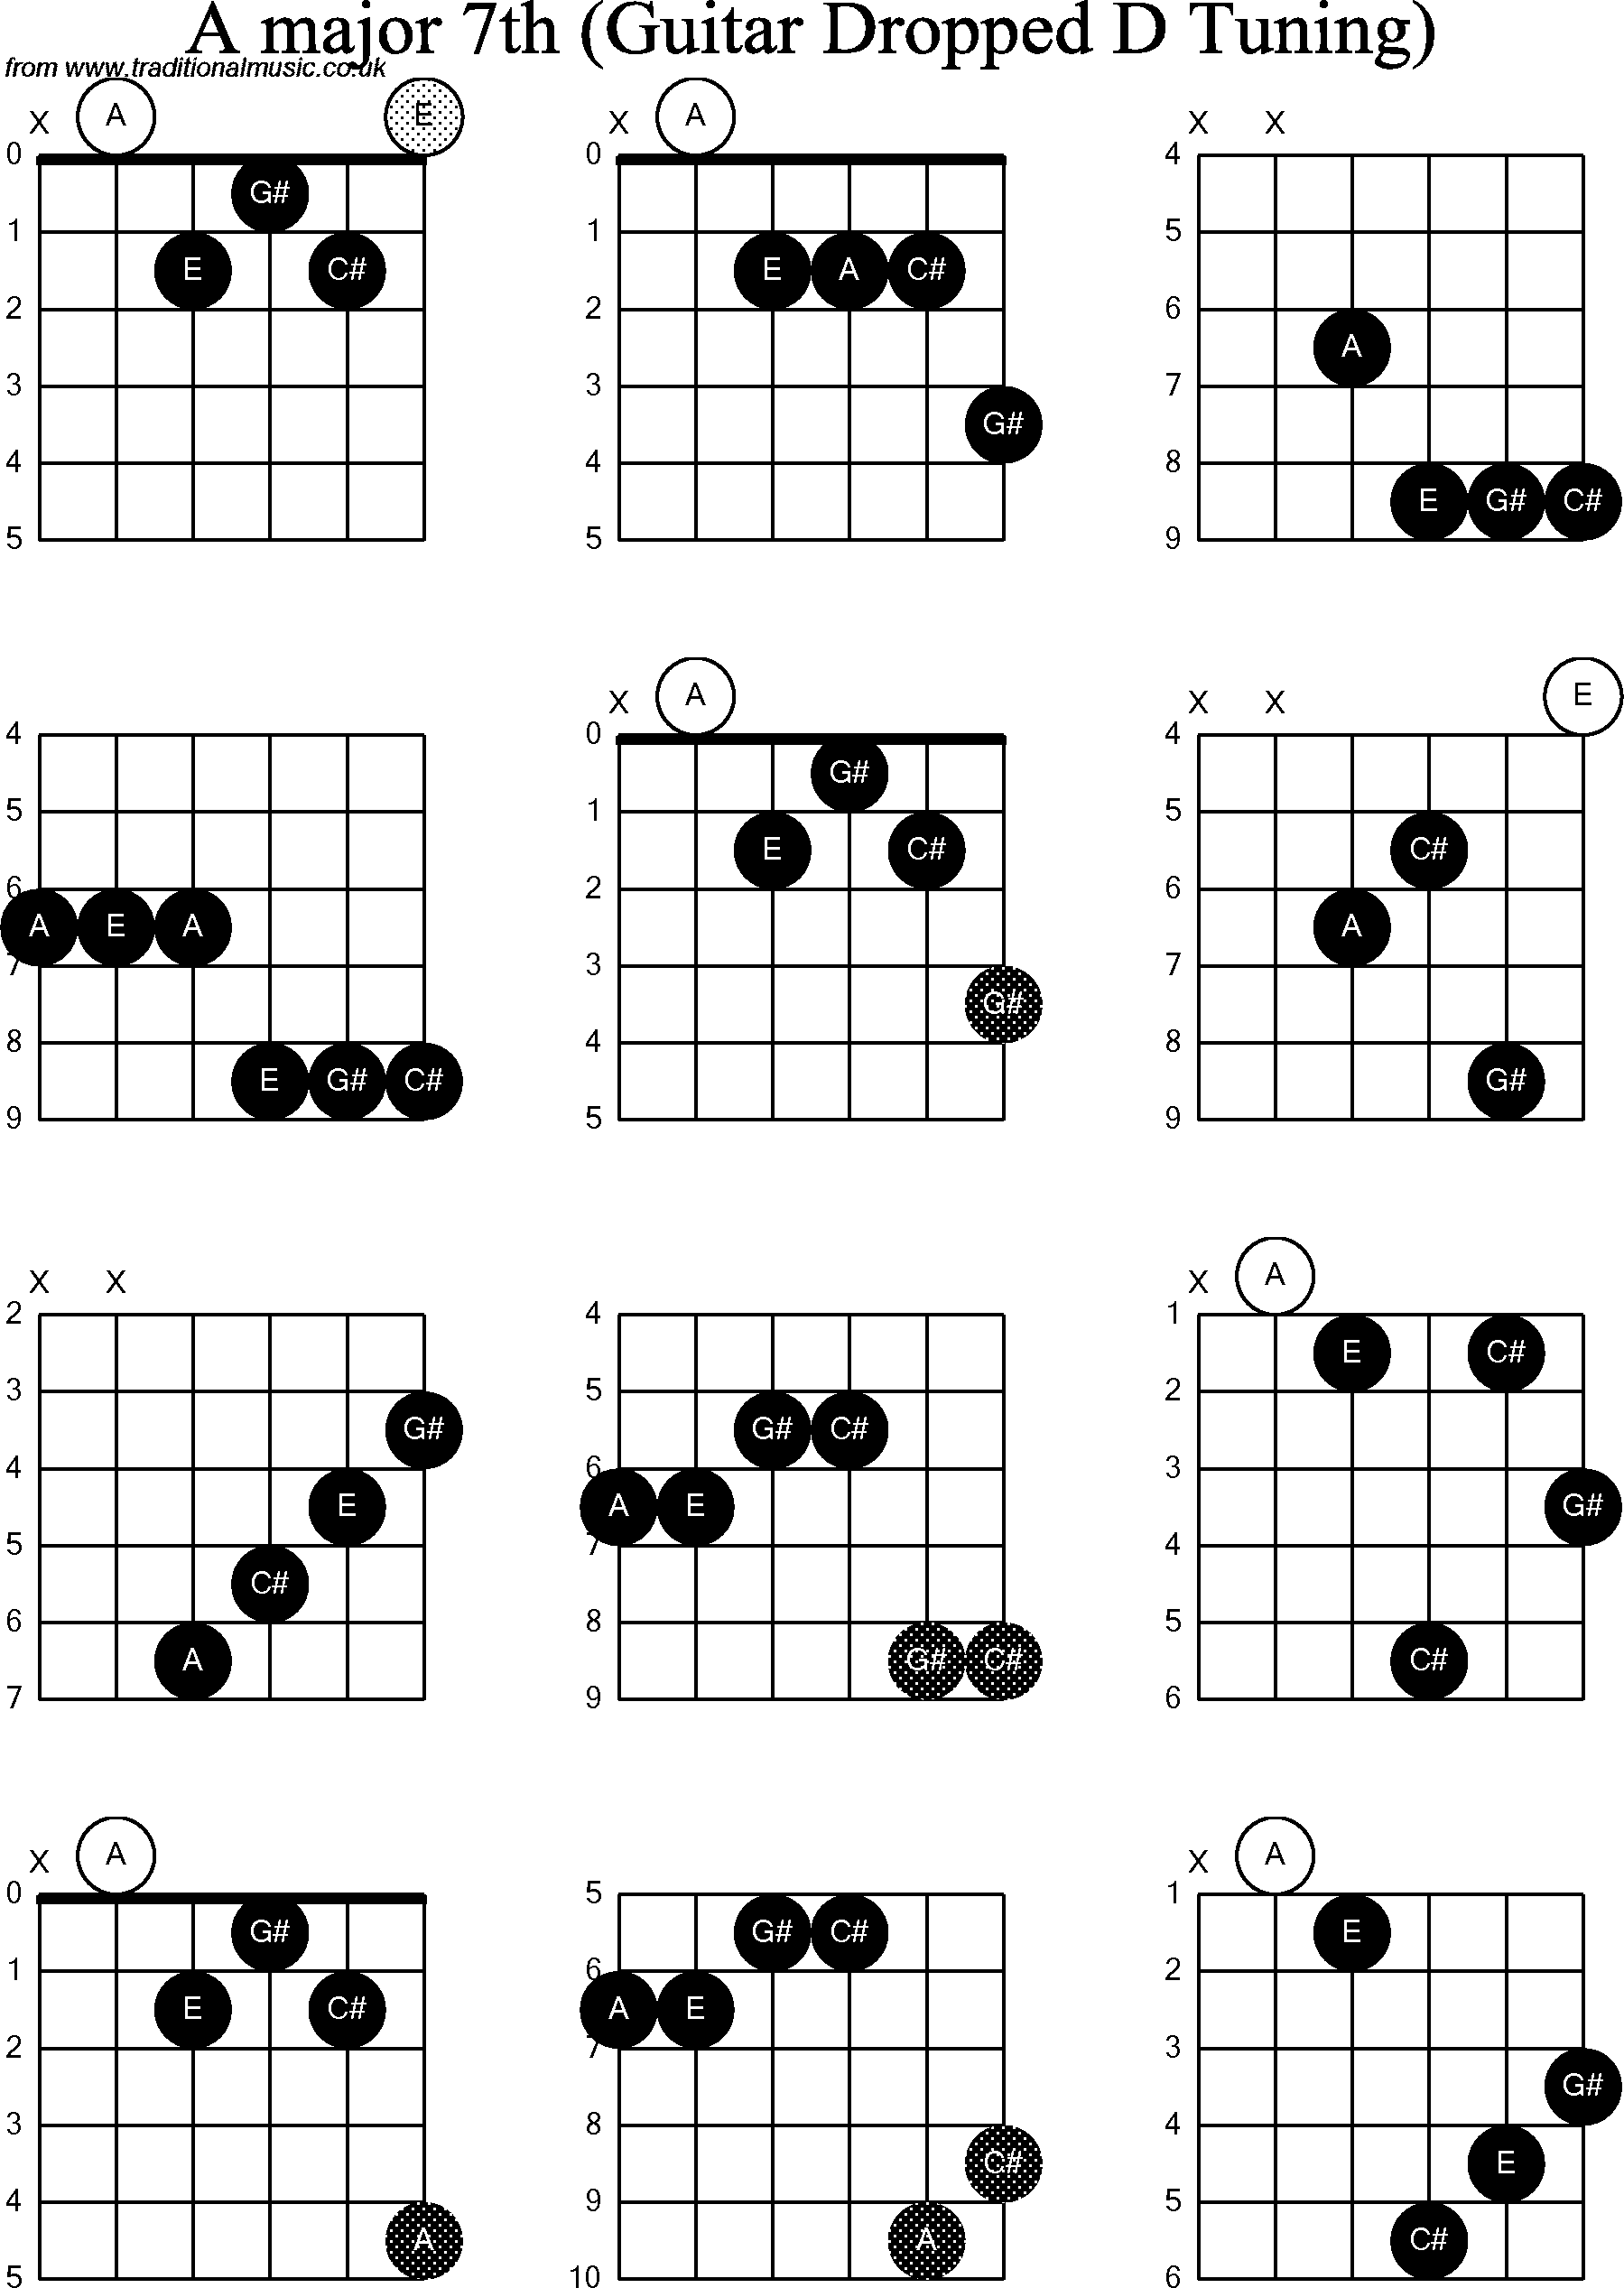 Chord diagrams for Dropped D Guitar(DADGBE), E Major7th